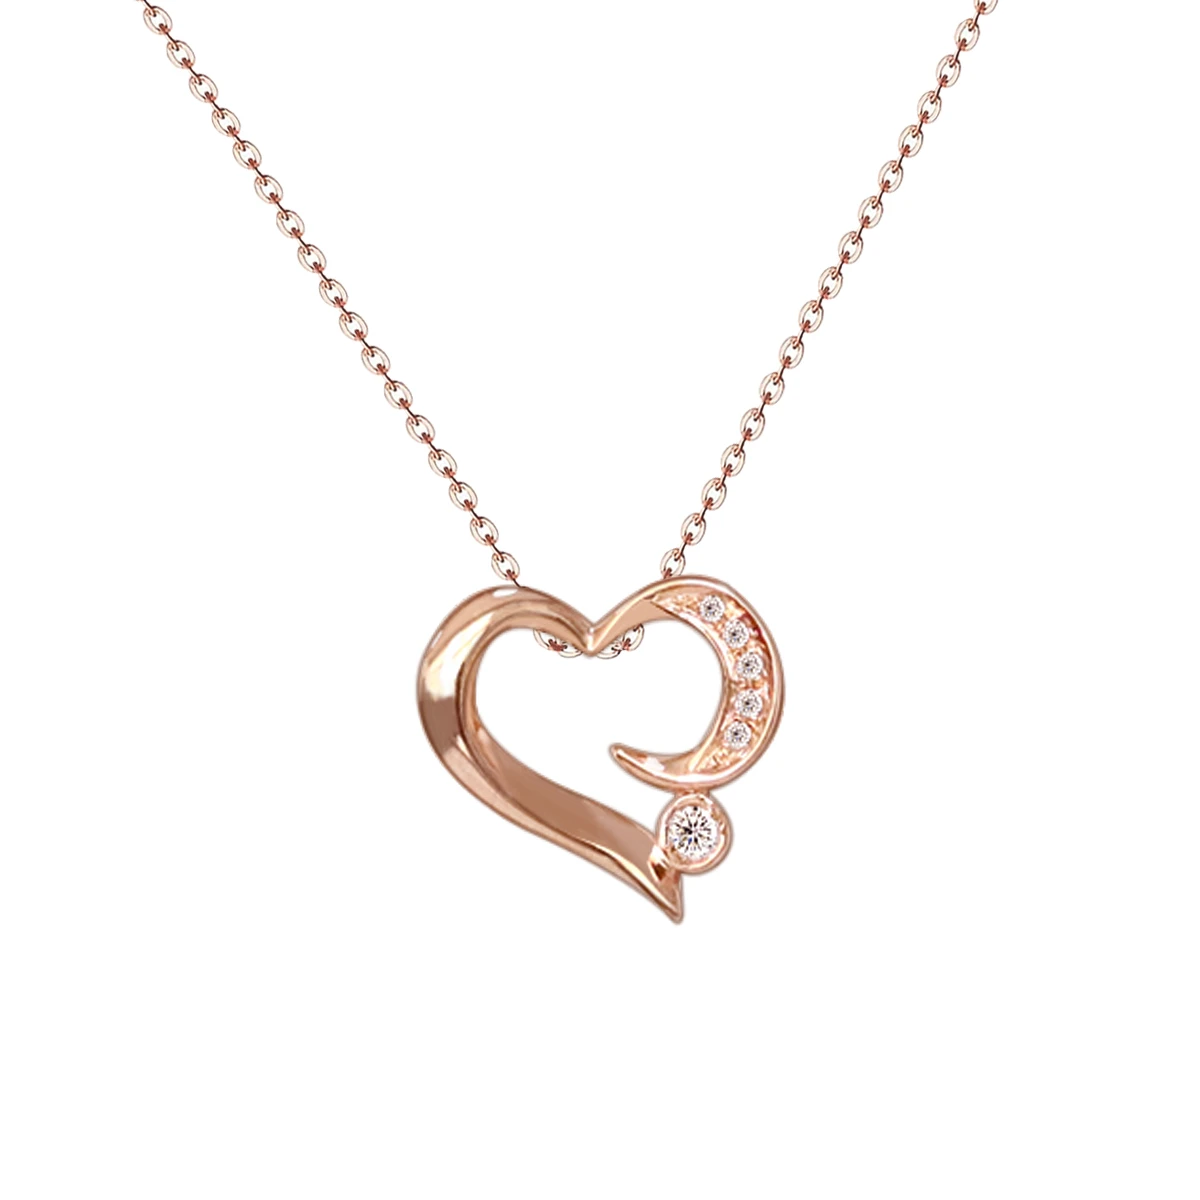 1000S Valentines Day Gift Real Diamond 18K Genuine Gold Plated Love Heart Pendant Necklace Jewelry Wholesale